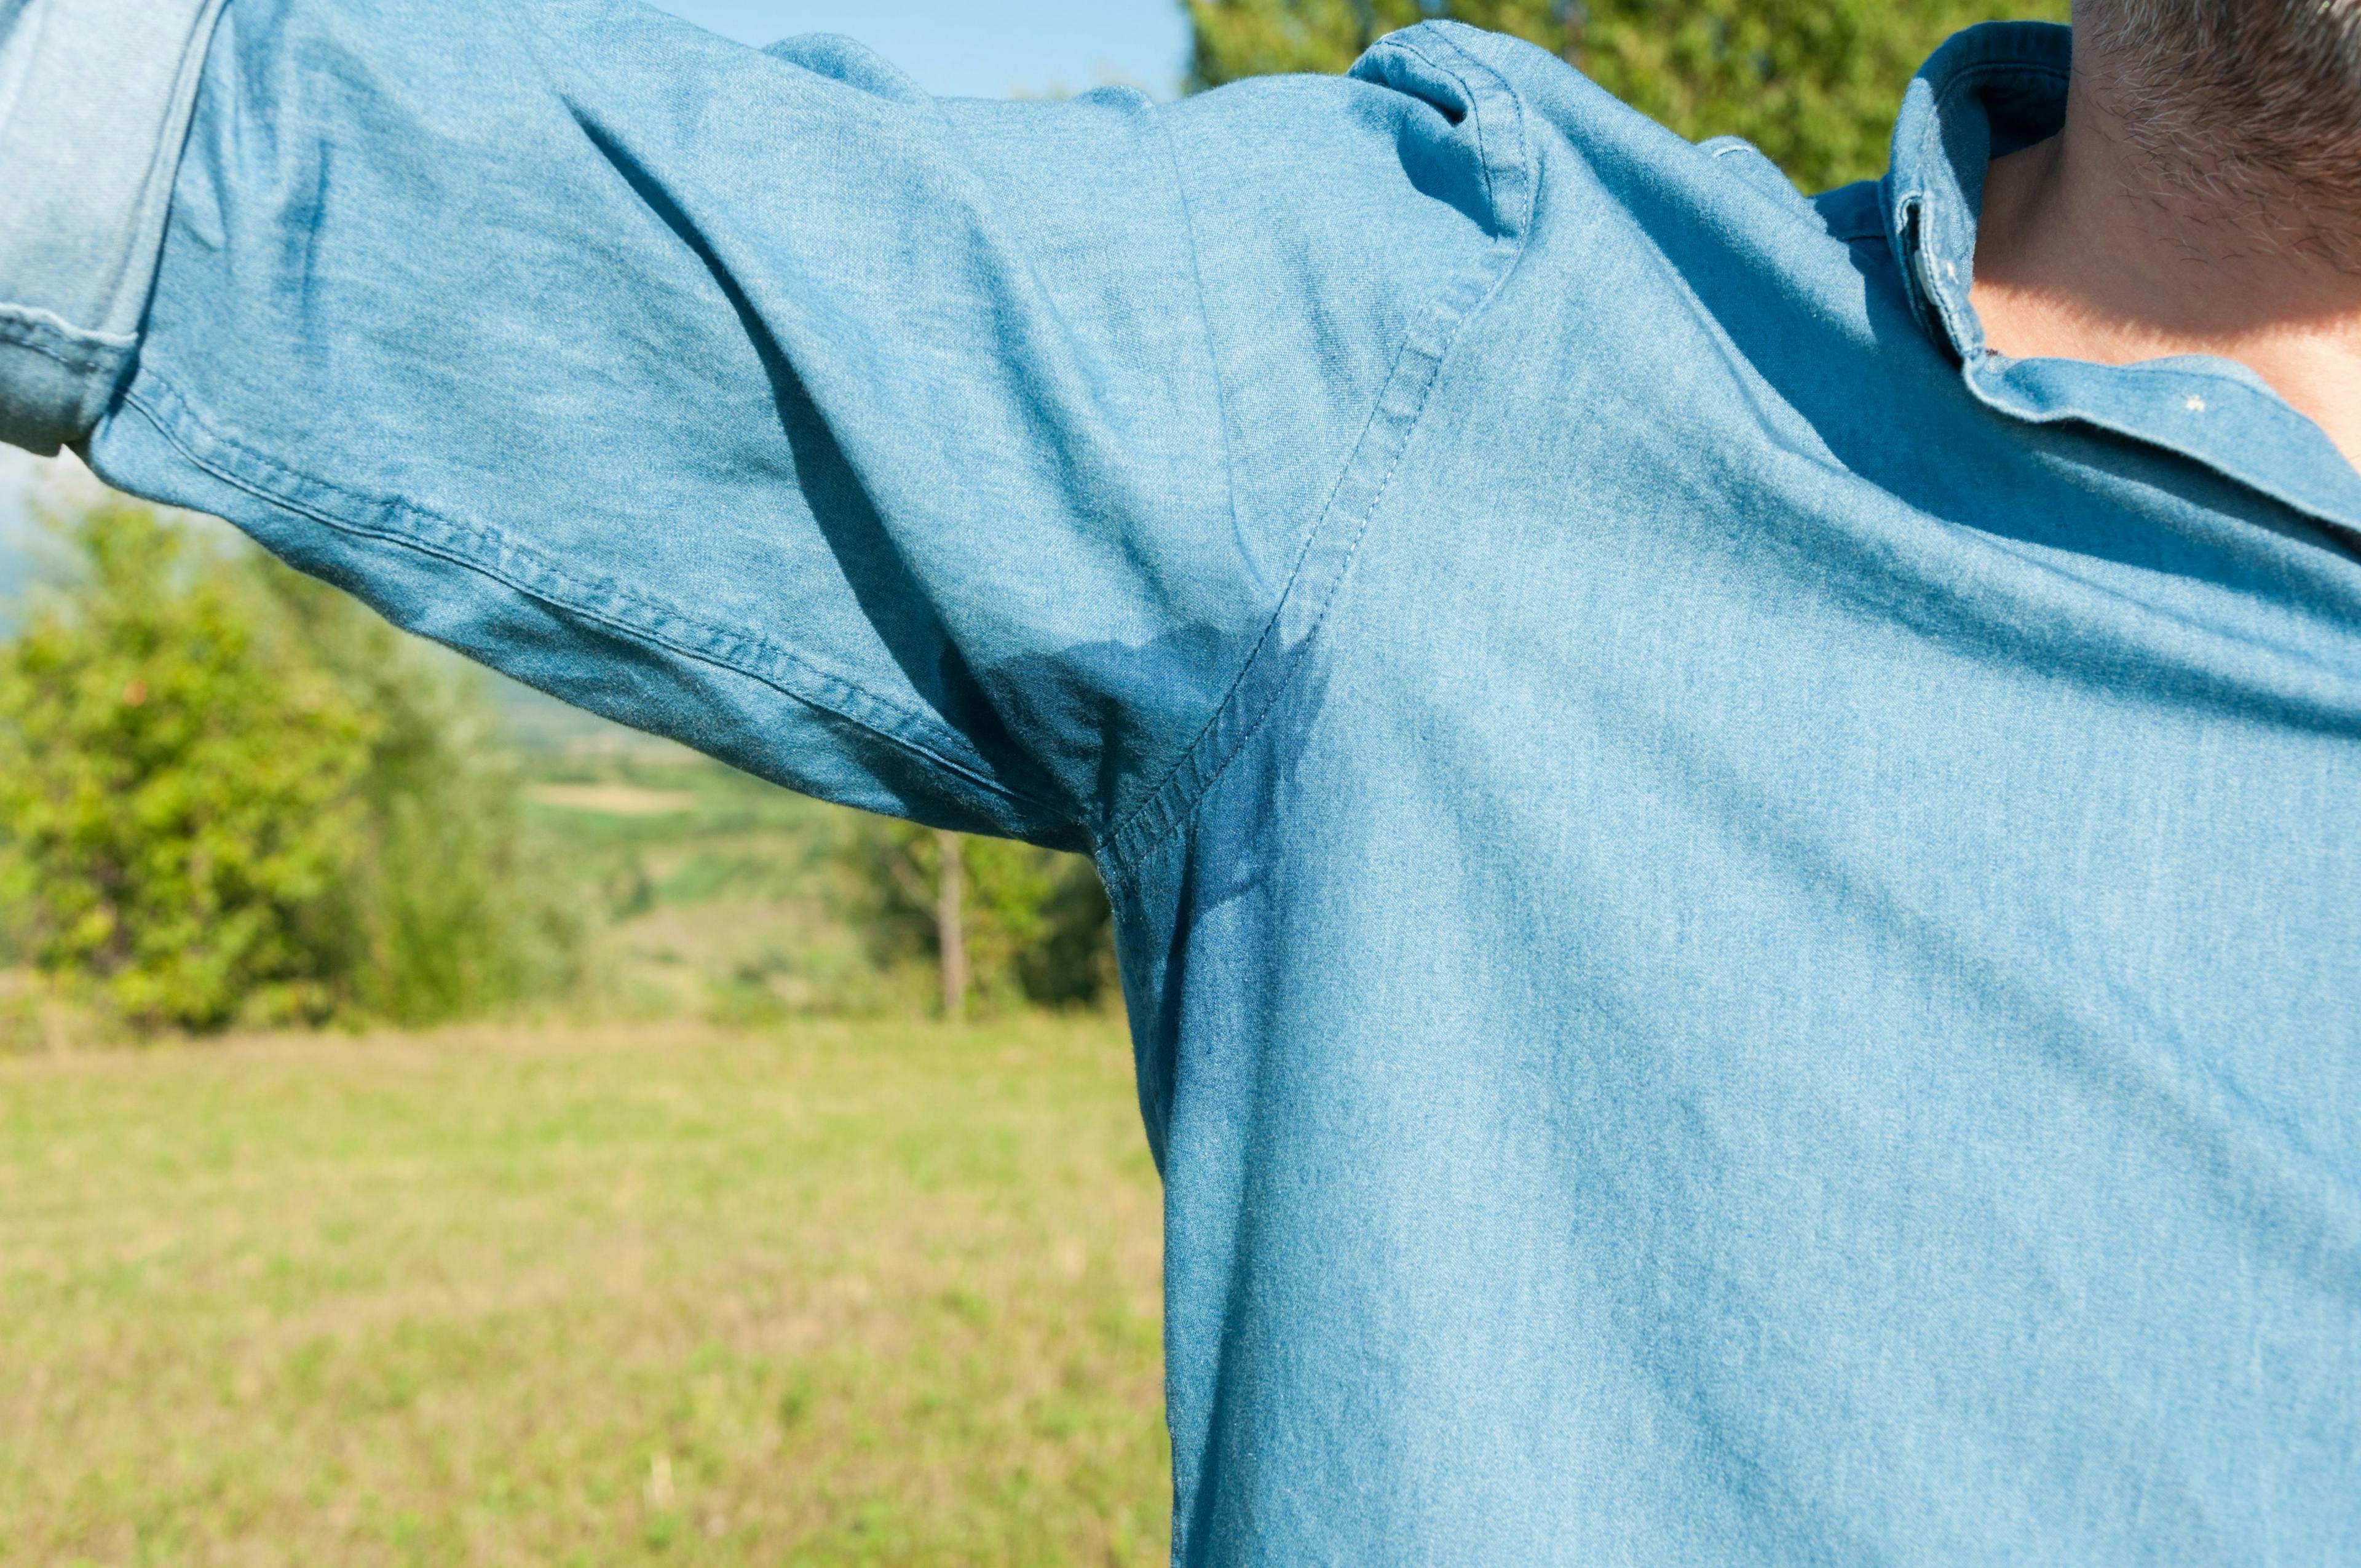 FDA approves treatment for underarm sweating